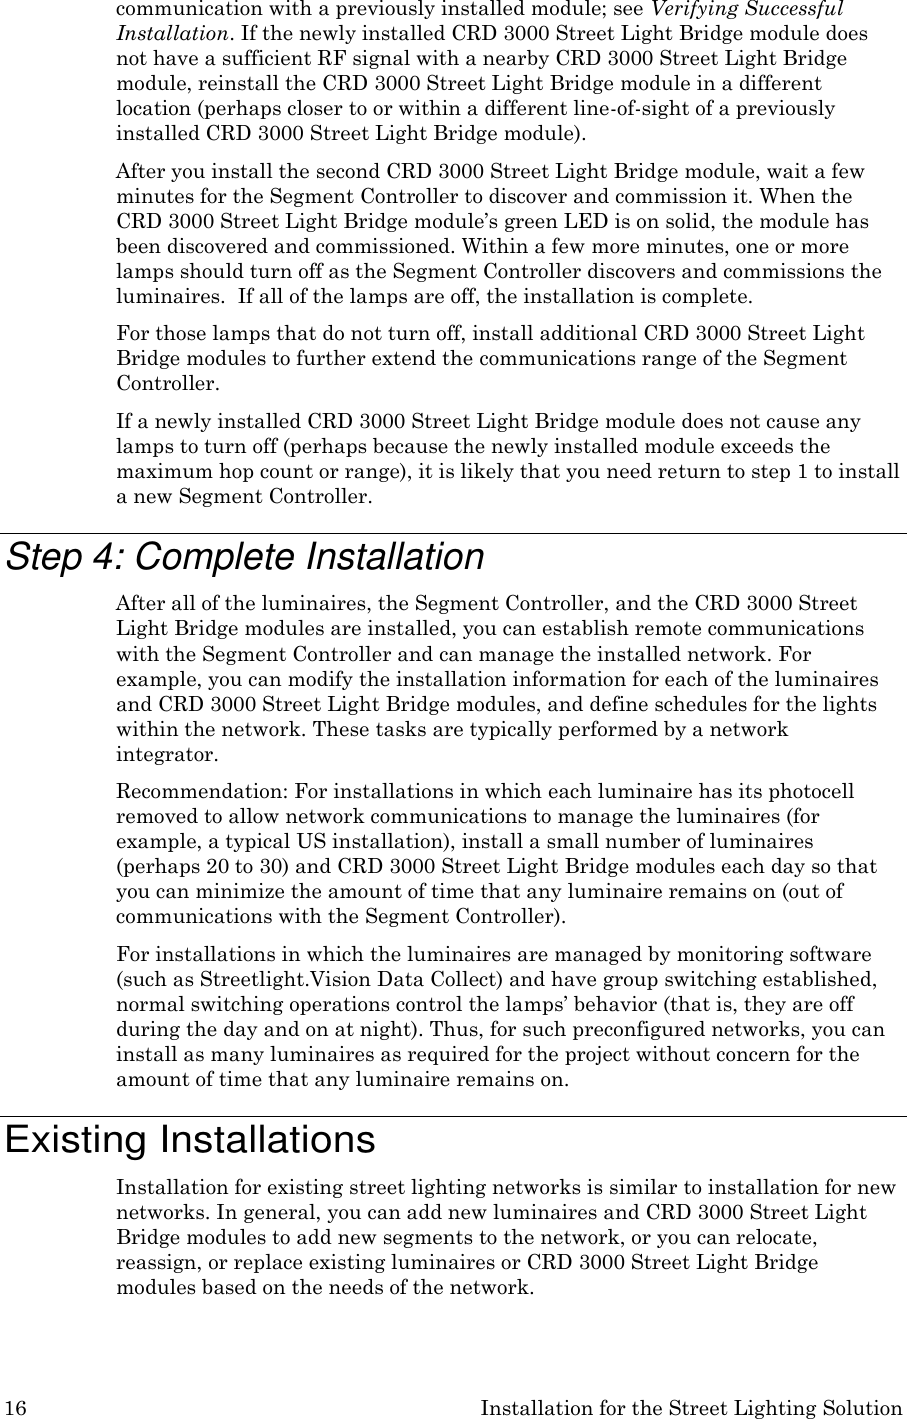 16 Installation for the Street Lighting Solution  communication with a previously installed module; see Verifying Successful Installation. If the newly installed CRD 3000 Street Light Bridge module does not have a sufficient RF signal with a nearby CRD 3000 Street Light Bridge module, reinstall the CRD 3000 Street Light Bridge module in a different location (perhaps closer to or within a different line-of-sight of a previously installed CRD 3000 Street Light Bridge module). After you install the second CRD 3000 Street Light Bridge module, wait a few minutes for the Segment Controller to discover and commission it. When the CRD 3000 Street Light Bridge module’s green LED is on solid, the module has been discovered and commissioned. Within a few more minutes, one or more lamps should turn off as the Segment Controller discovers and commissions the luminaires.  If all of the lamps are off, the installation is complete. For those lamps that do not turn off, install additional CRD 3000 Street Light Bridge modules to further extend the communications range of the Segment Controller. If a newly installed CRD 3000 Street Light Bridge module does not cause any lamps to turn off (perhaps because the newly installed module exceeds the maximum hop count or range), it is likely that you need return to step 1 to install a new Segment Controller.  Step 4: Complete Installation After all of the luminaires, the Segment Controller, and the CRD 3000 Street Light Bridge modules are installed, you can establish remote communications with the Segment Controller and can manage the installed network. For example, you can modify the installation information for each of the luminaires and CRD 3000 Street Light Bridge modules, and define schedules for the lights within the network. These tasks are typically performed by a network integrator. Recommendation: For installations in which each luminaire has its photocell removed to allow network communications to manage the luminaires (for example, a typical US installation), install a small number of luminaires (perhaps 20 to 30) and CRD 3000 Street Light Bridge modules each day so that you can minimize the amount of time that any luminaire remains on (out of communications with the Segment Controller). For installations in which the luminaires are managed by monitoring software (such as Streetlight.Vision Data Collect) and have group switching established, normal switching operations control the lamps’ behavior (that is, they are off during the day and on at night). Thus, for such preconfigured networks, you can install as many luminaires as required for the project without concern for the amount of time that any luminaire remains on.  Existing Installations Installation for existing street lighting networks is similar to installation for new networks. In general, you can add new luminaires and CRD 3000 Street Light Bridge modules to add new segments to the network, or you can relocate, reassign, or replace existing luminaires or CRD 3000 Street Light Bridge modules based on the needs of the network. 